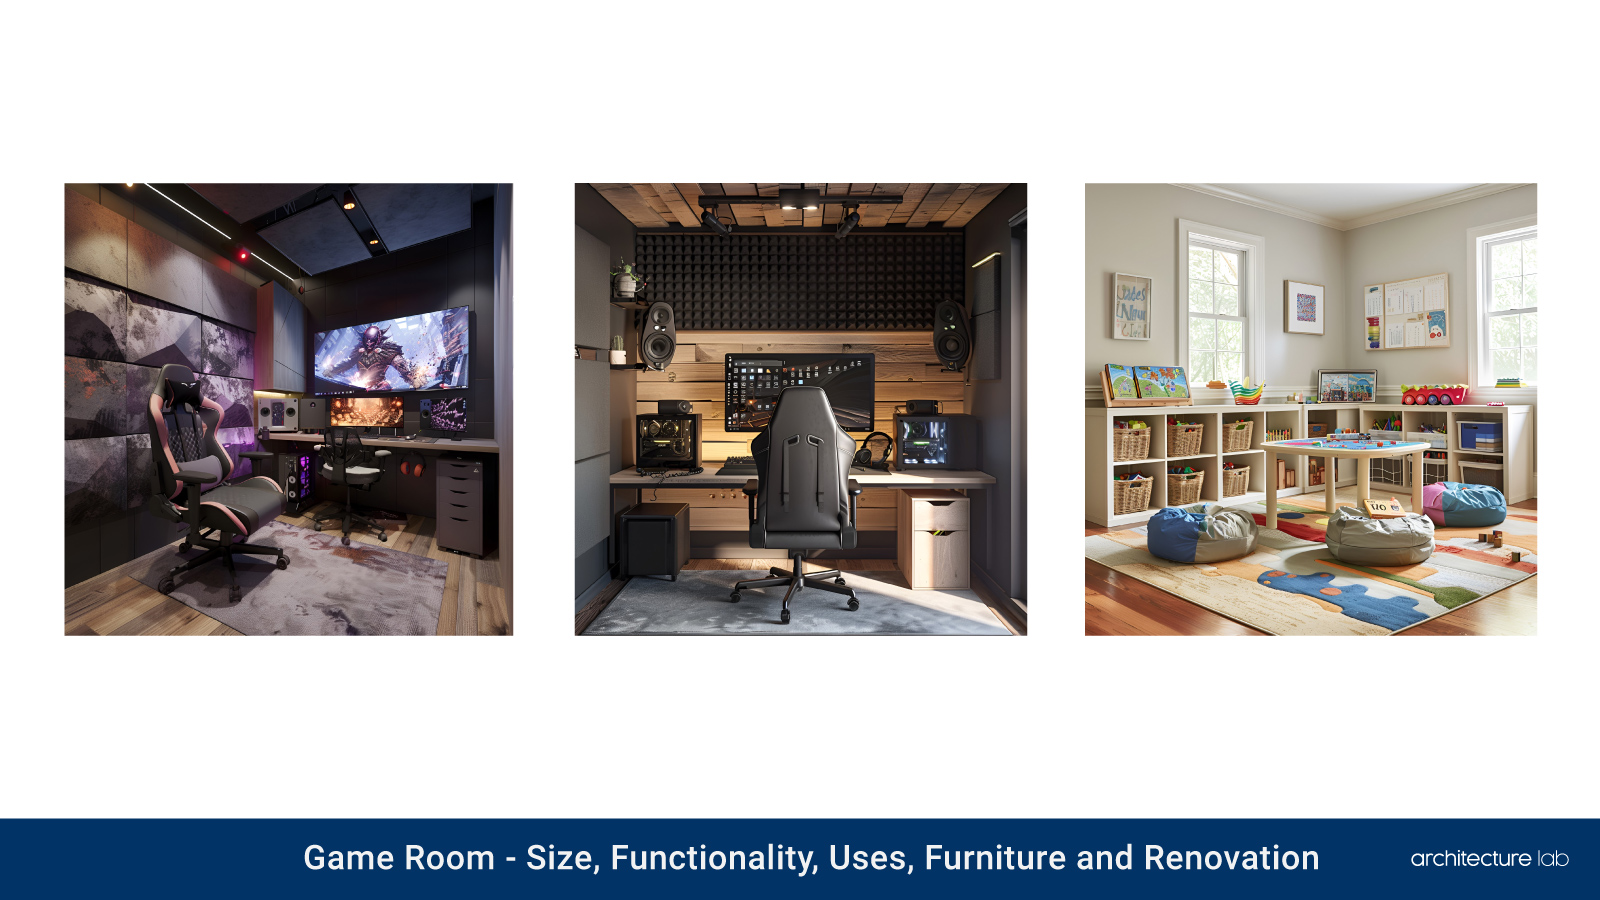 Game room: size, functionality, uses, furniture and renovation